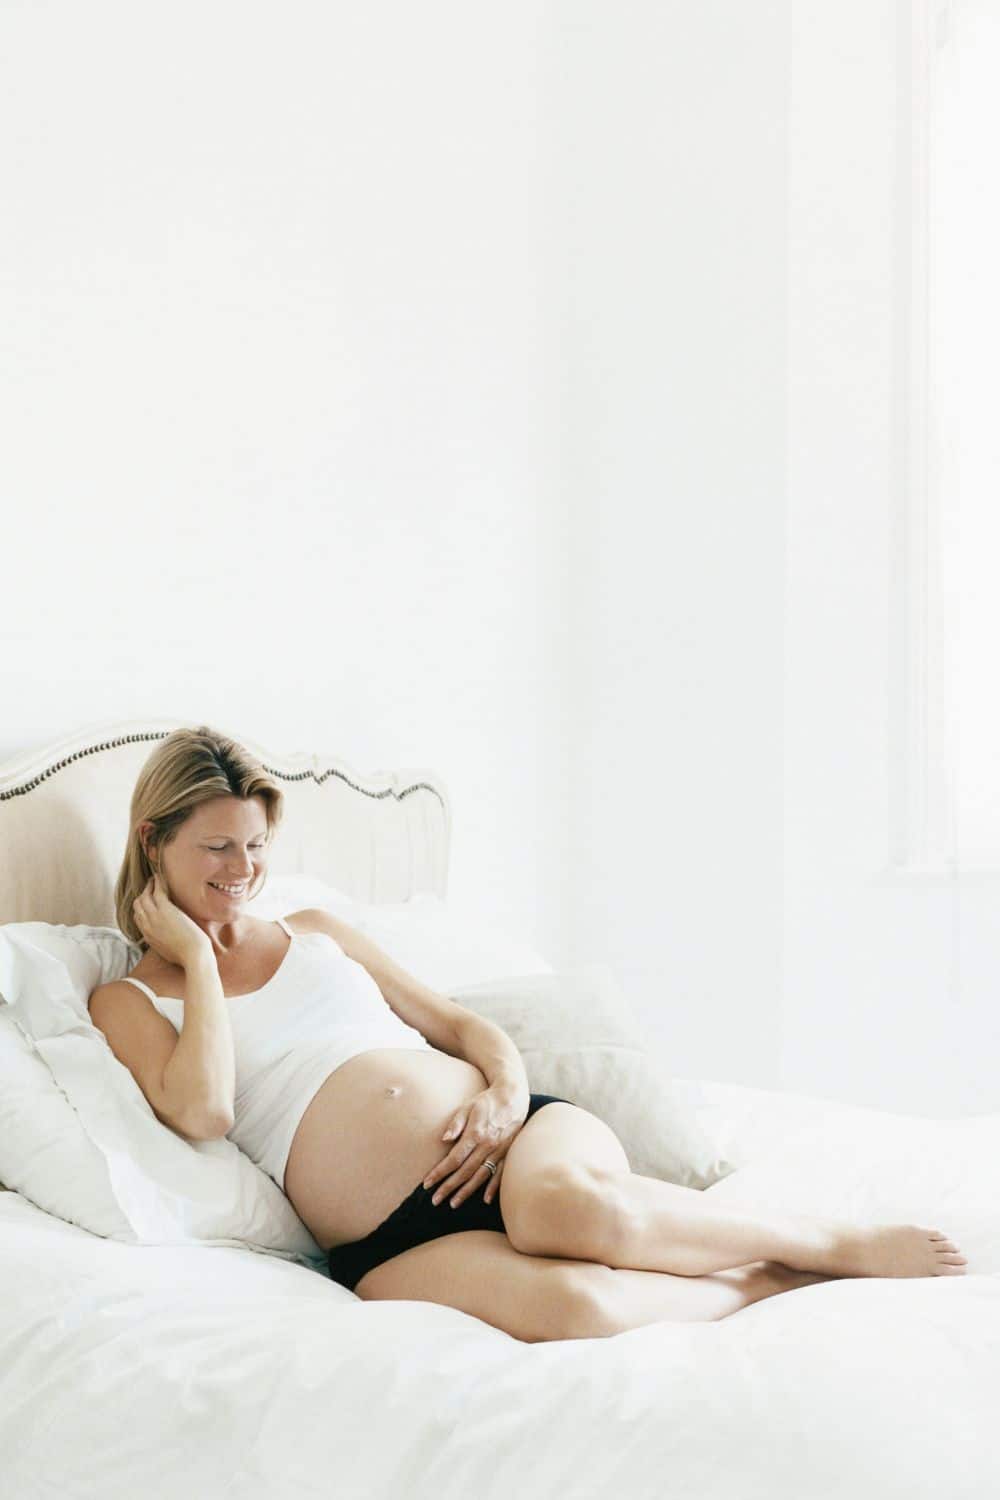 How to Feel Confident and Empowered During Pregnancy